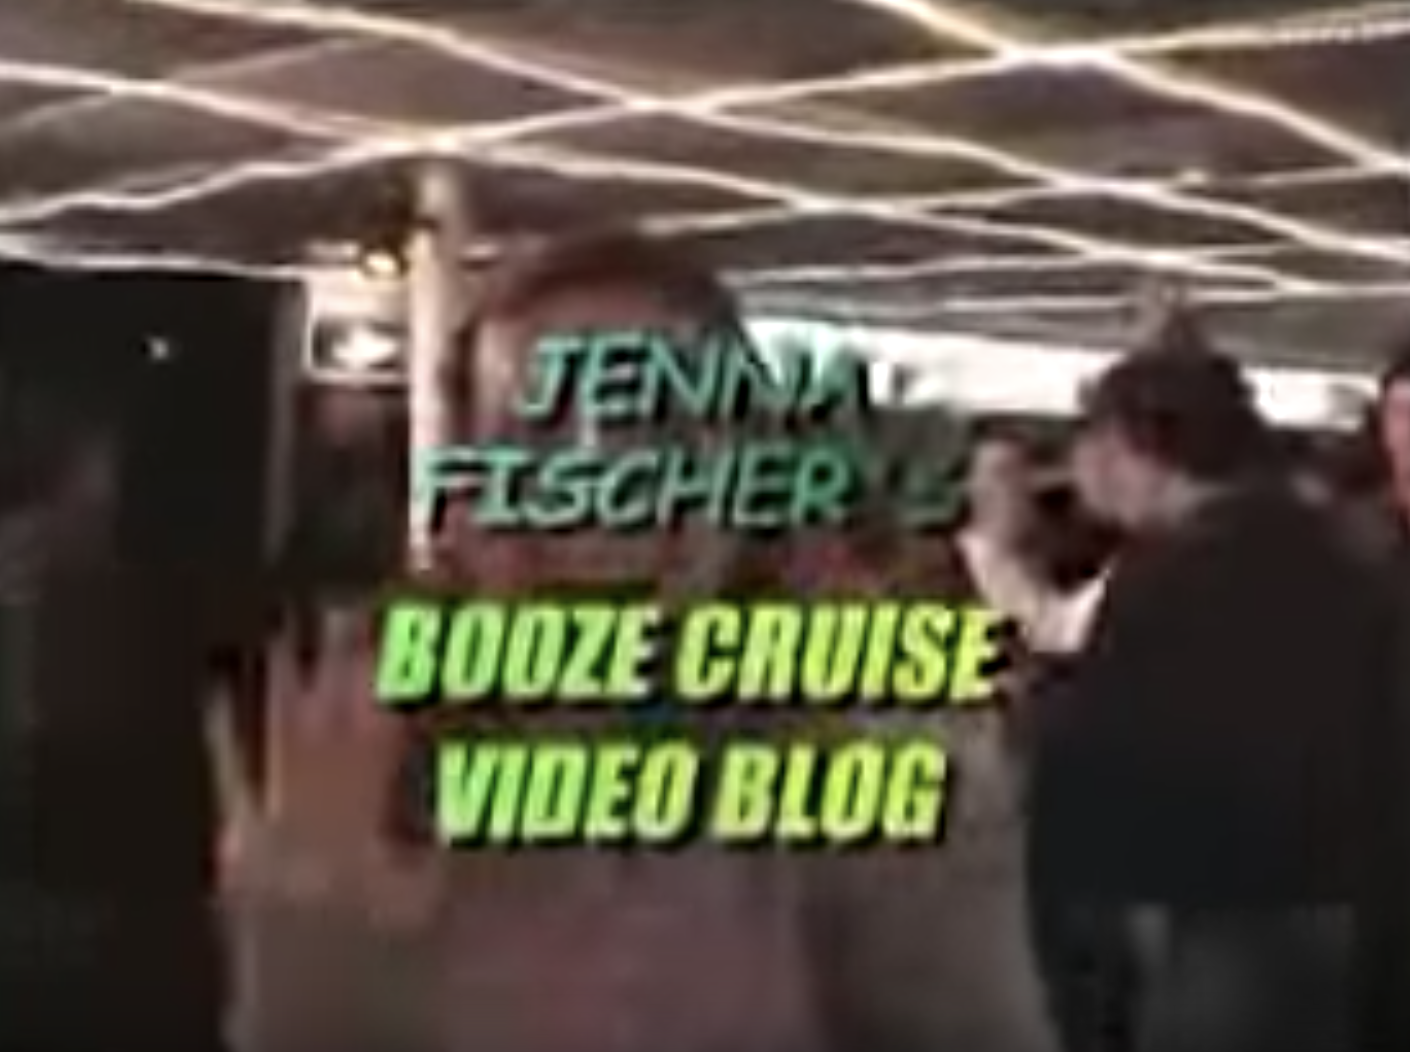 Jenna Fischer Just Found Her Old "The Office" Video Blog And Its